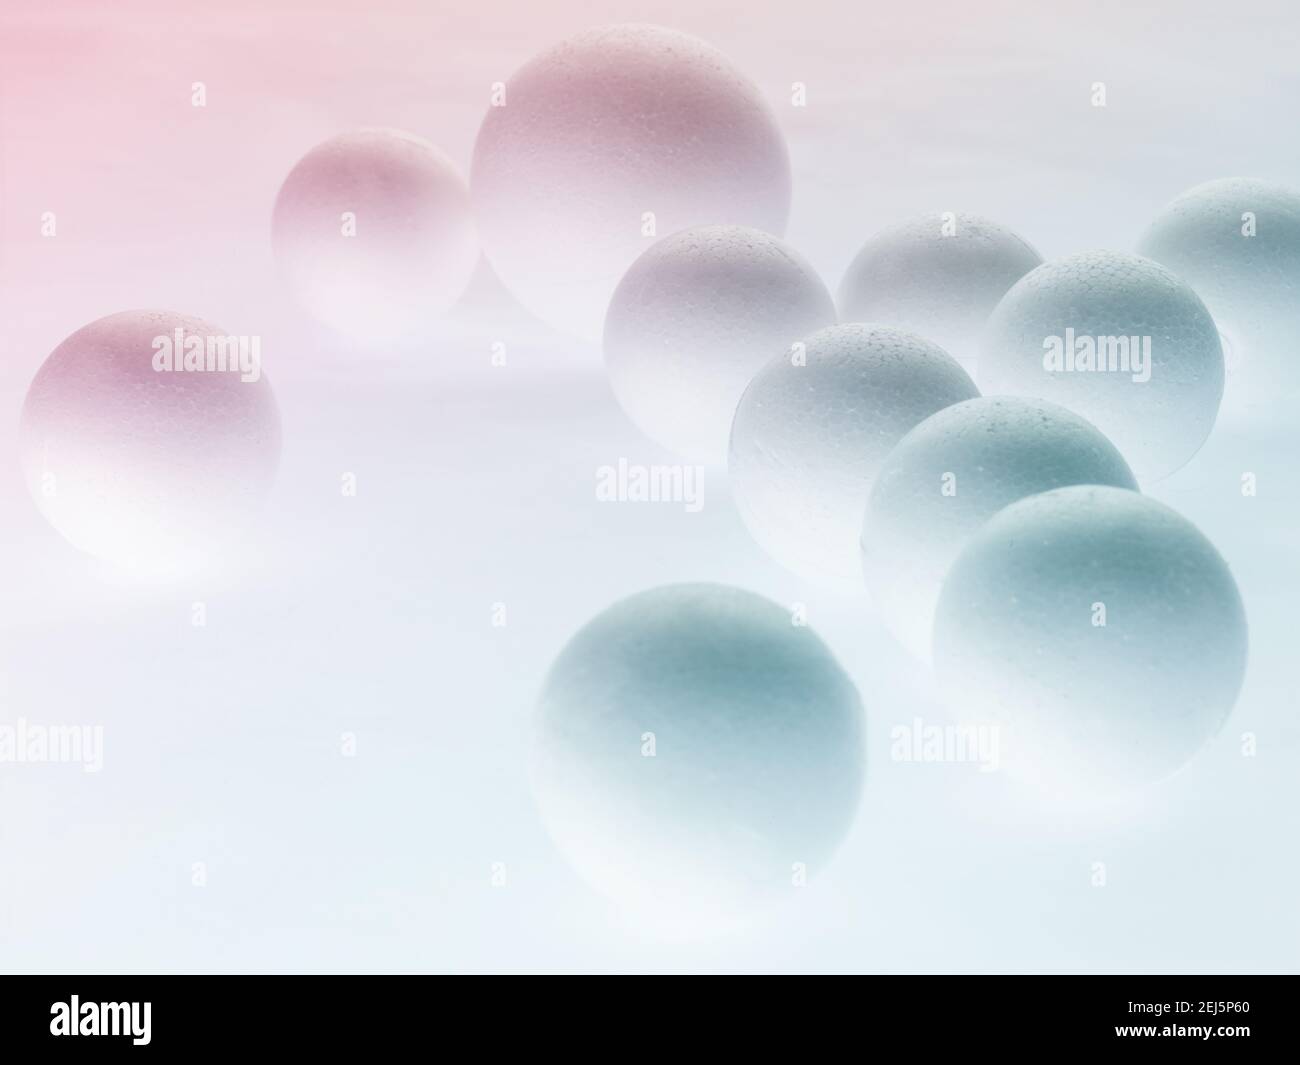 Abstract spheres background on white paper background. Soft light study with white background. Pastel color Stock Photo